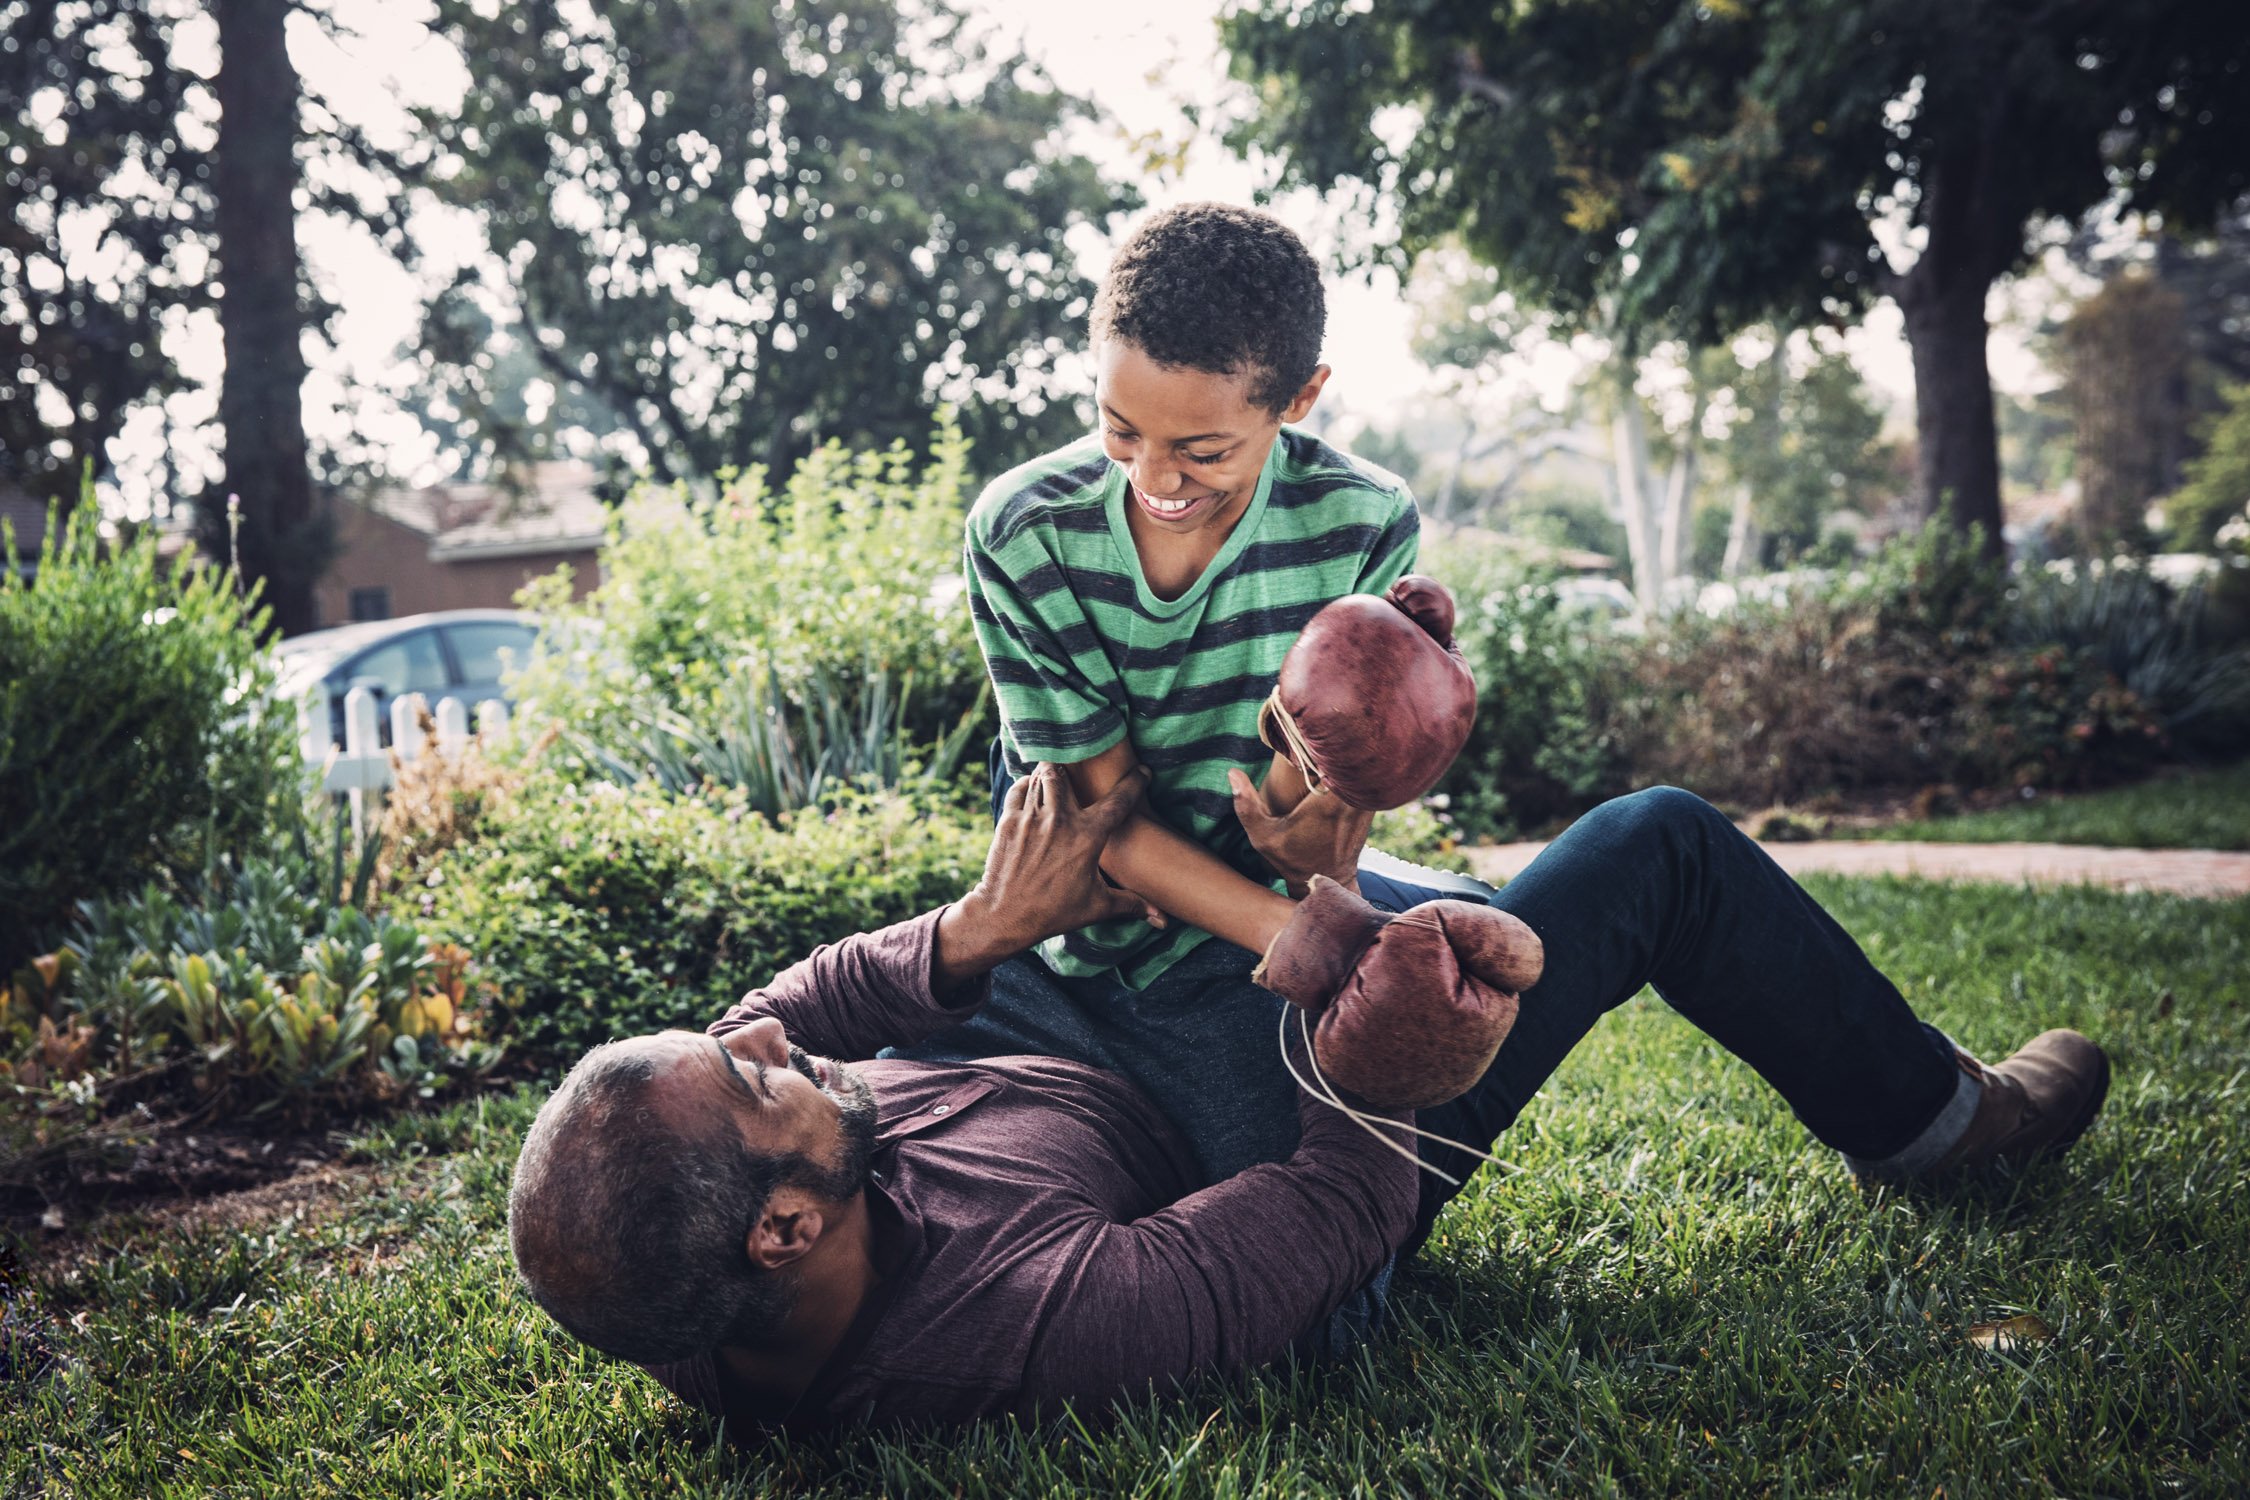 2016_10_13_Fairlife_LA father son playing on front lawn Clayton Hauck 0438.jpg